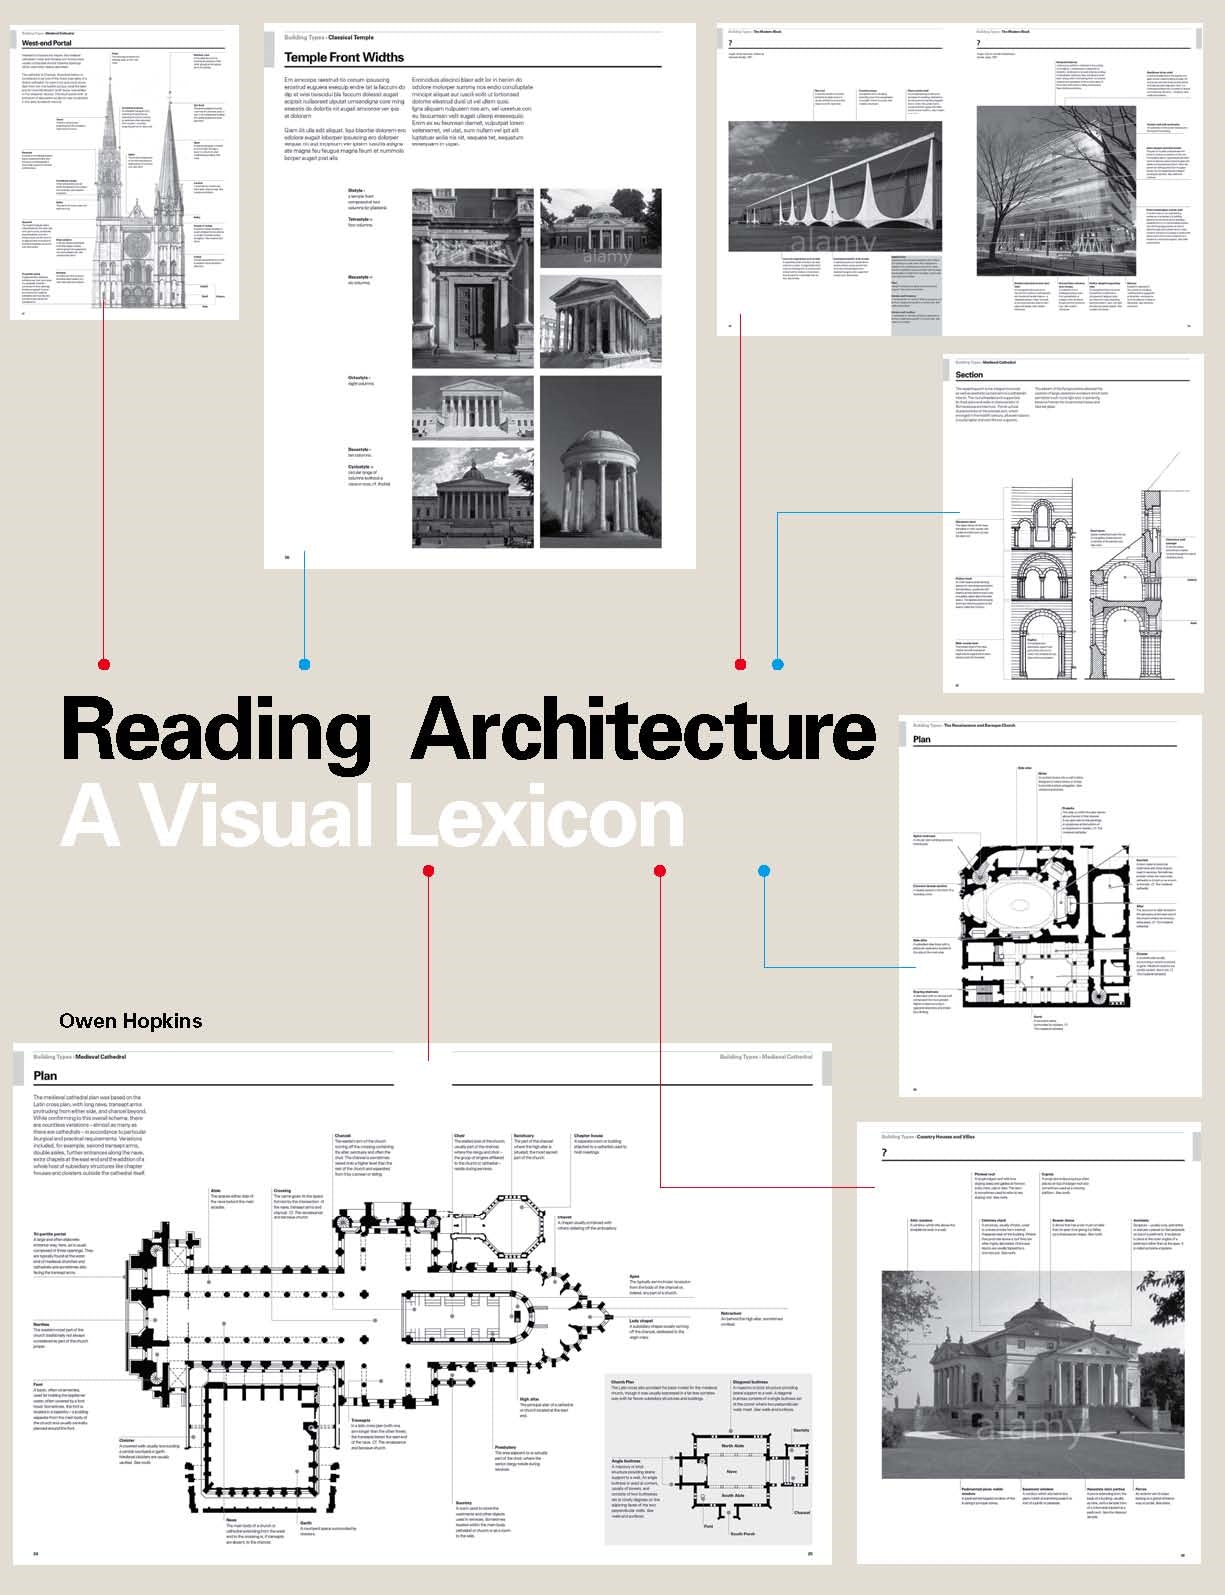 Reading Architecture by Owen Hopkins